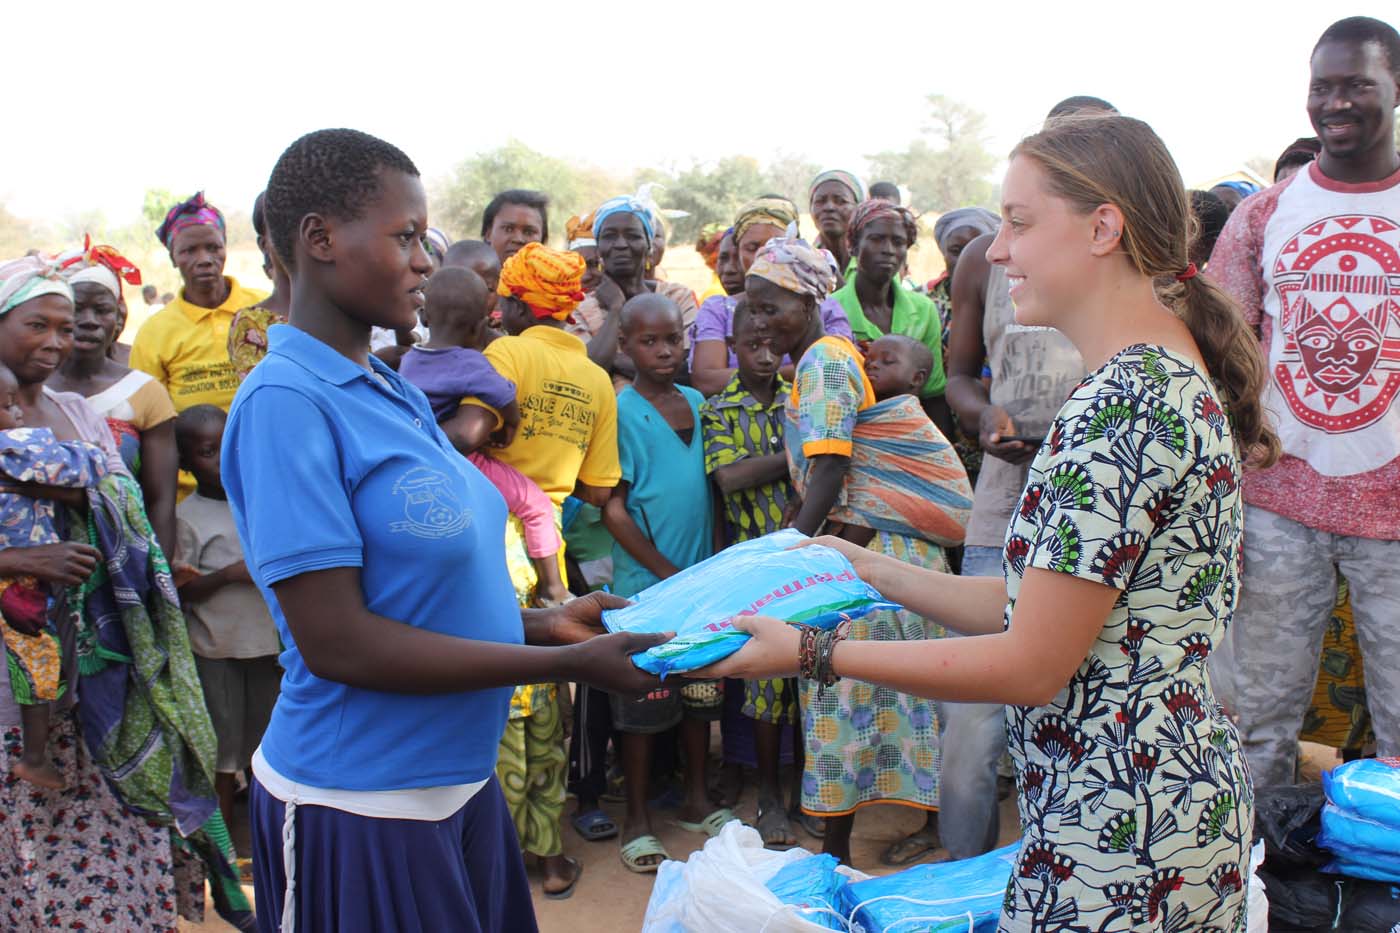 Our Peace Corps volunteer handing out a mosquito net